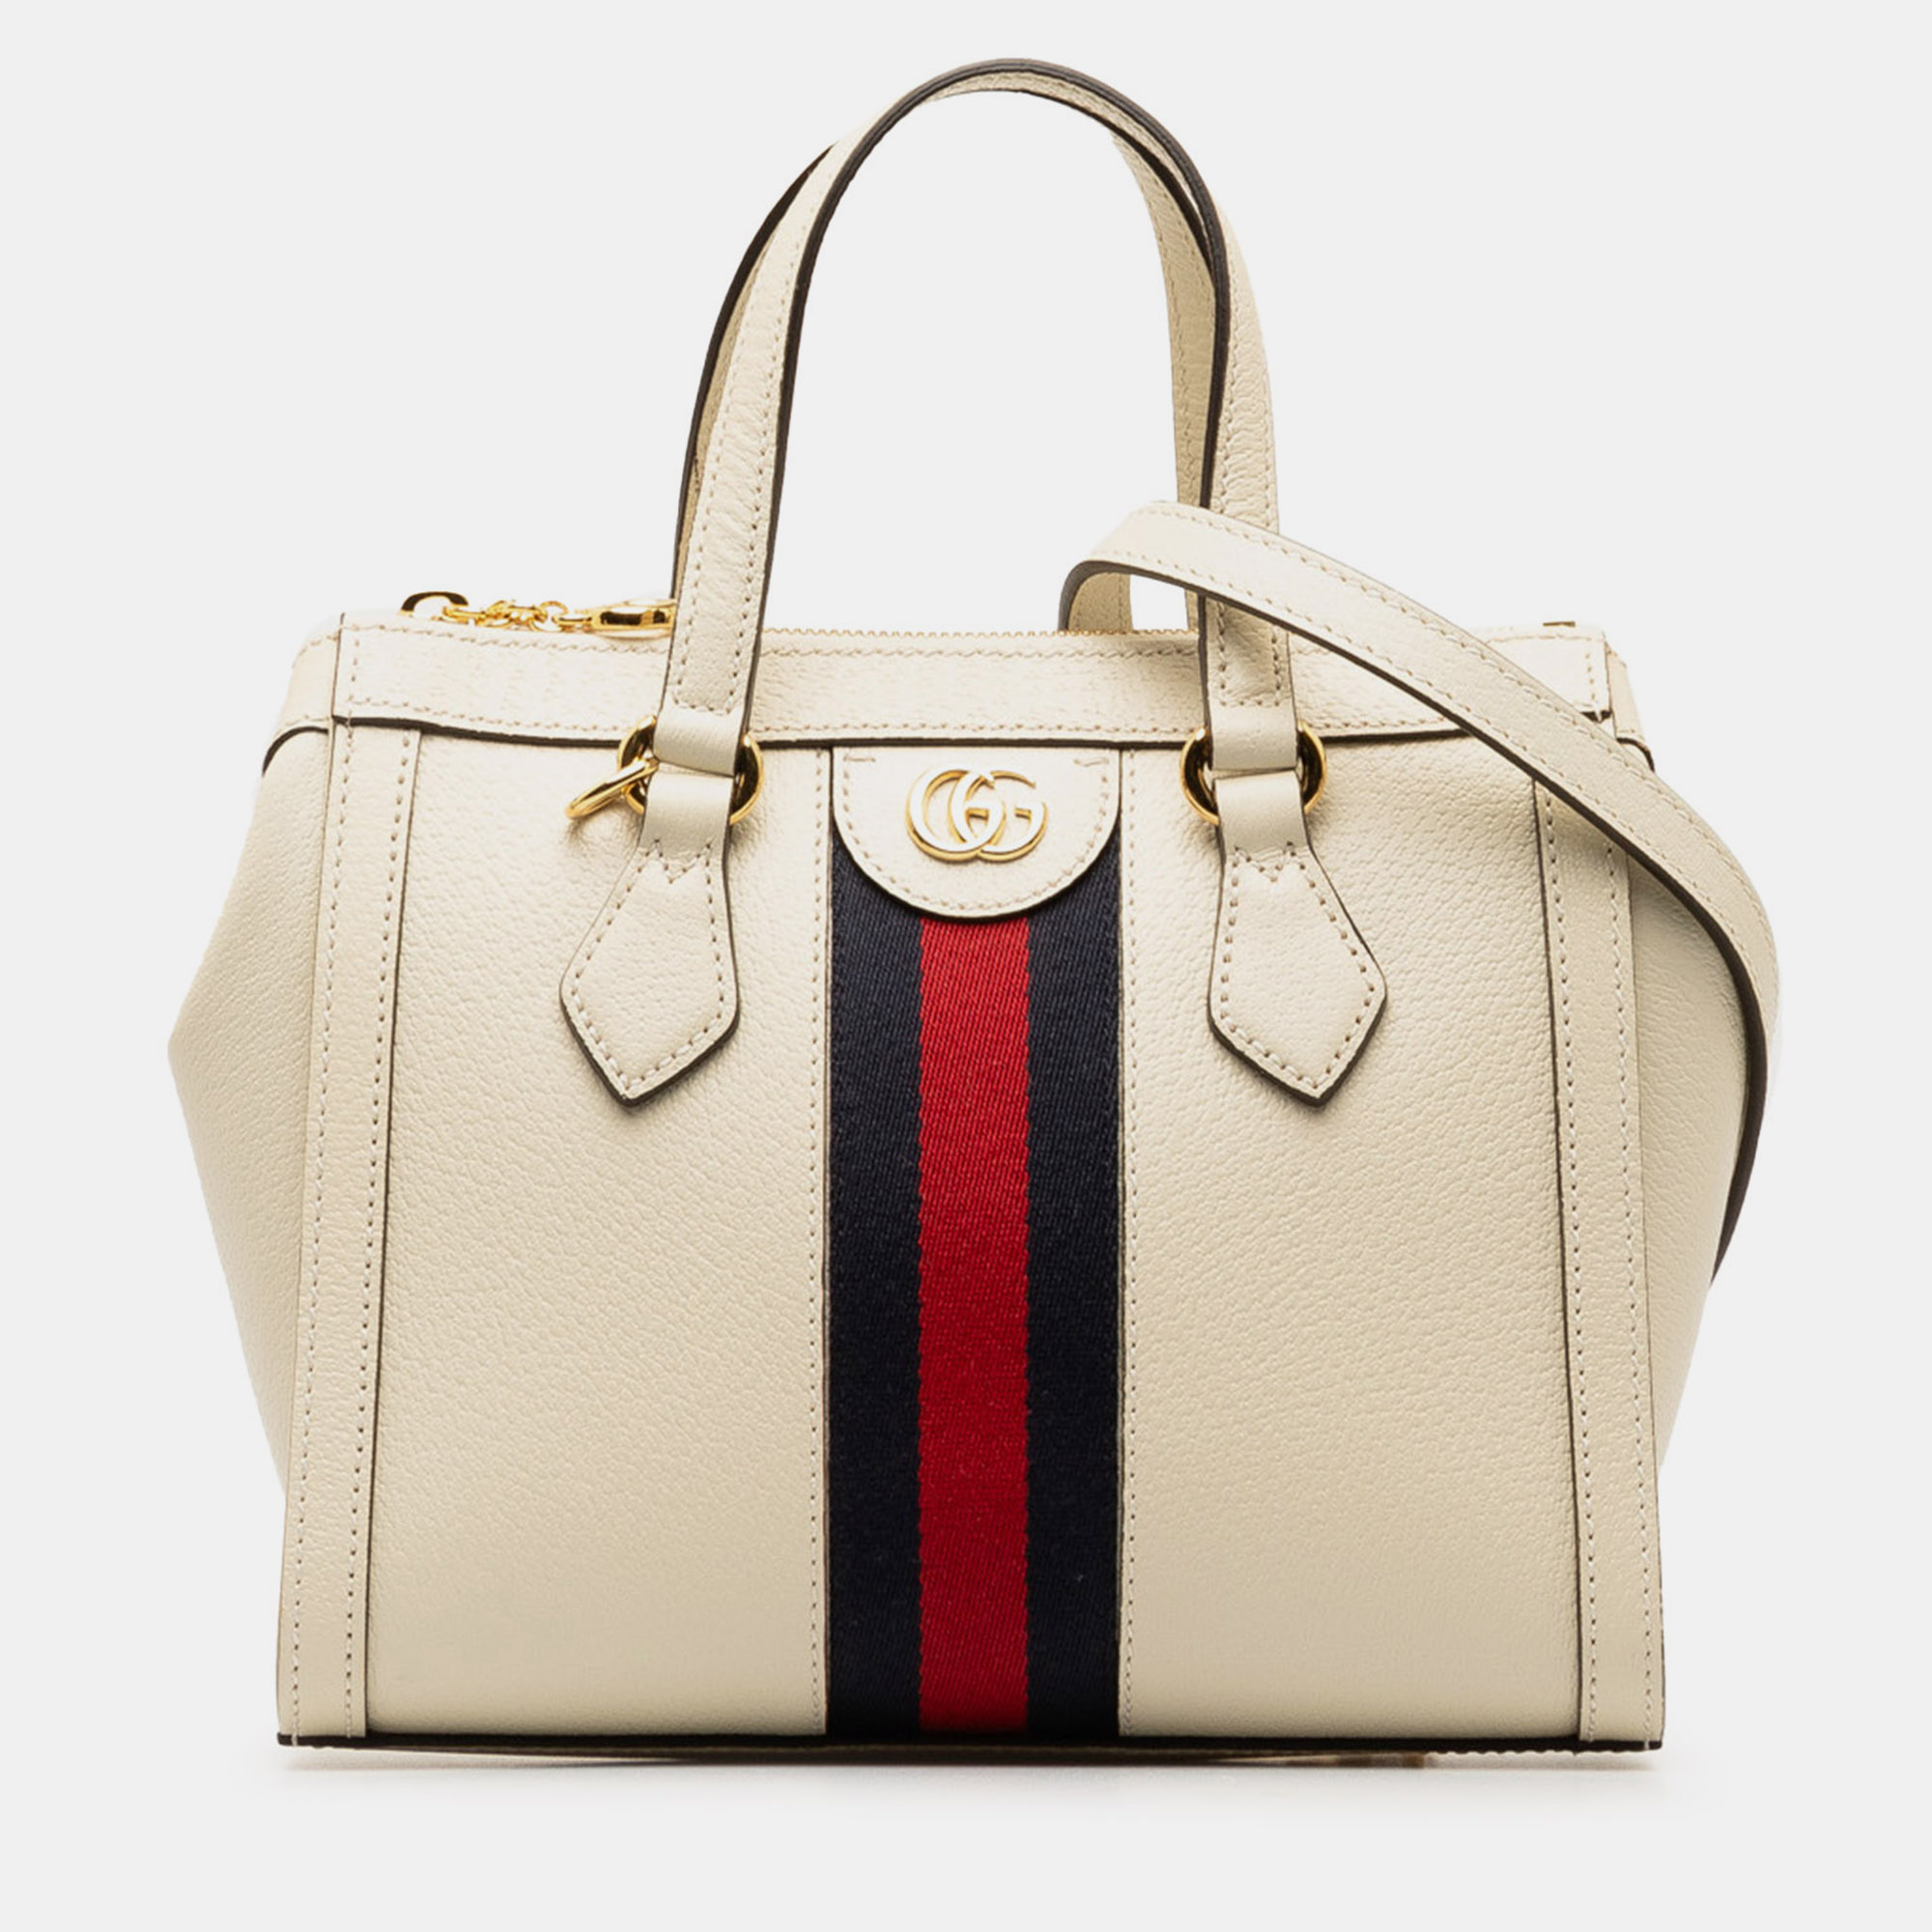 Gucci small ophidia leather satchel